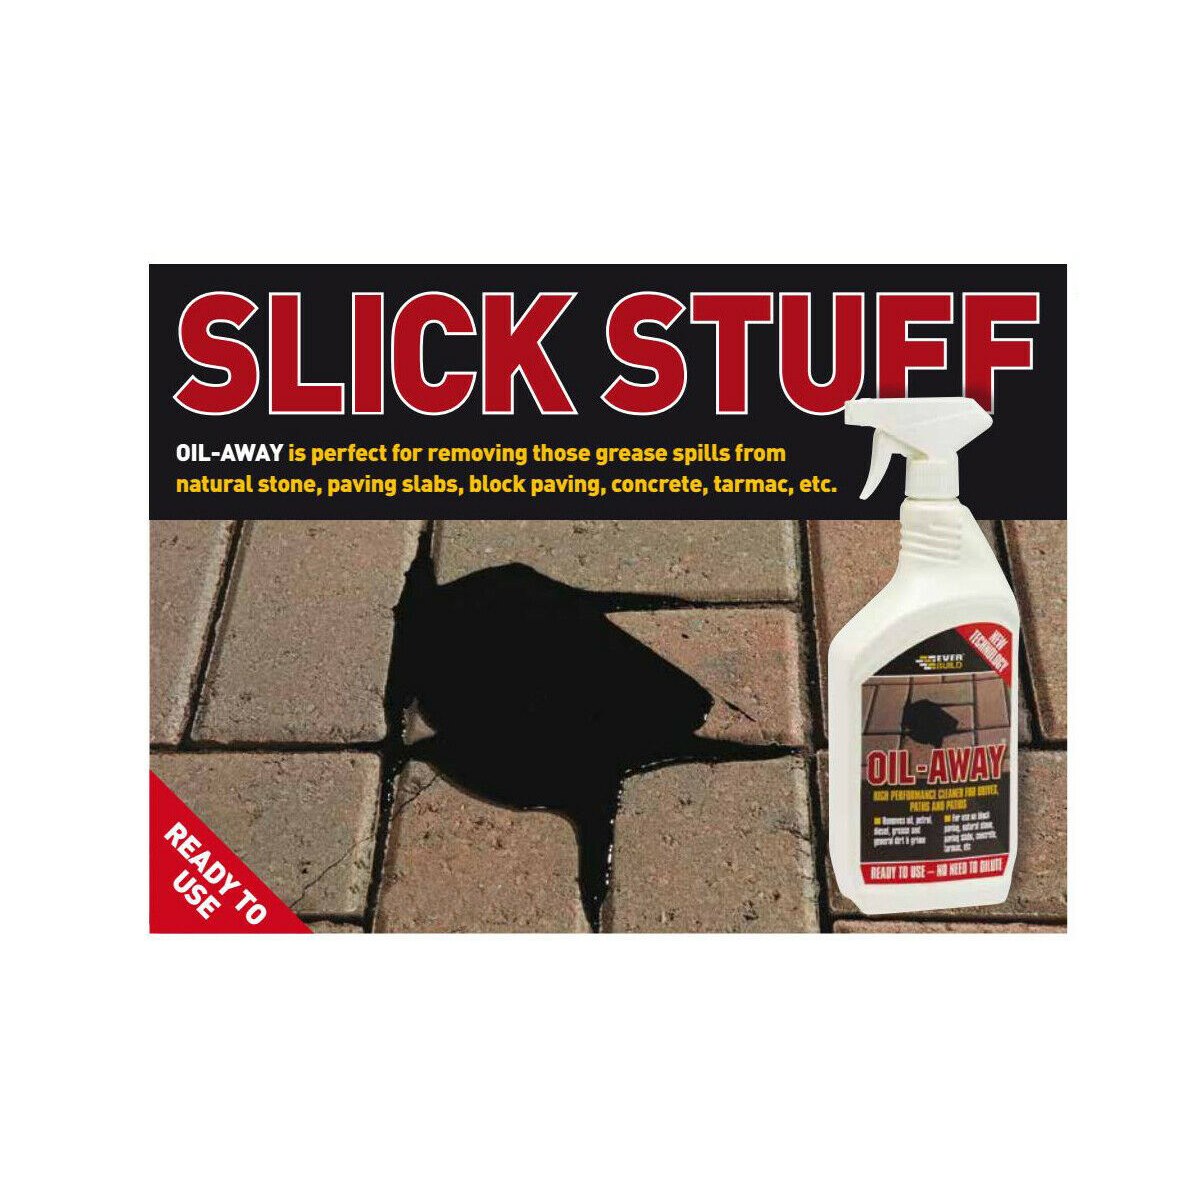 Removing Oil Stains from Driveways